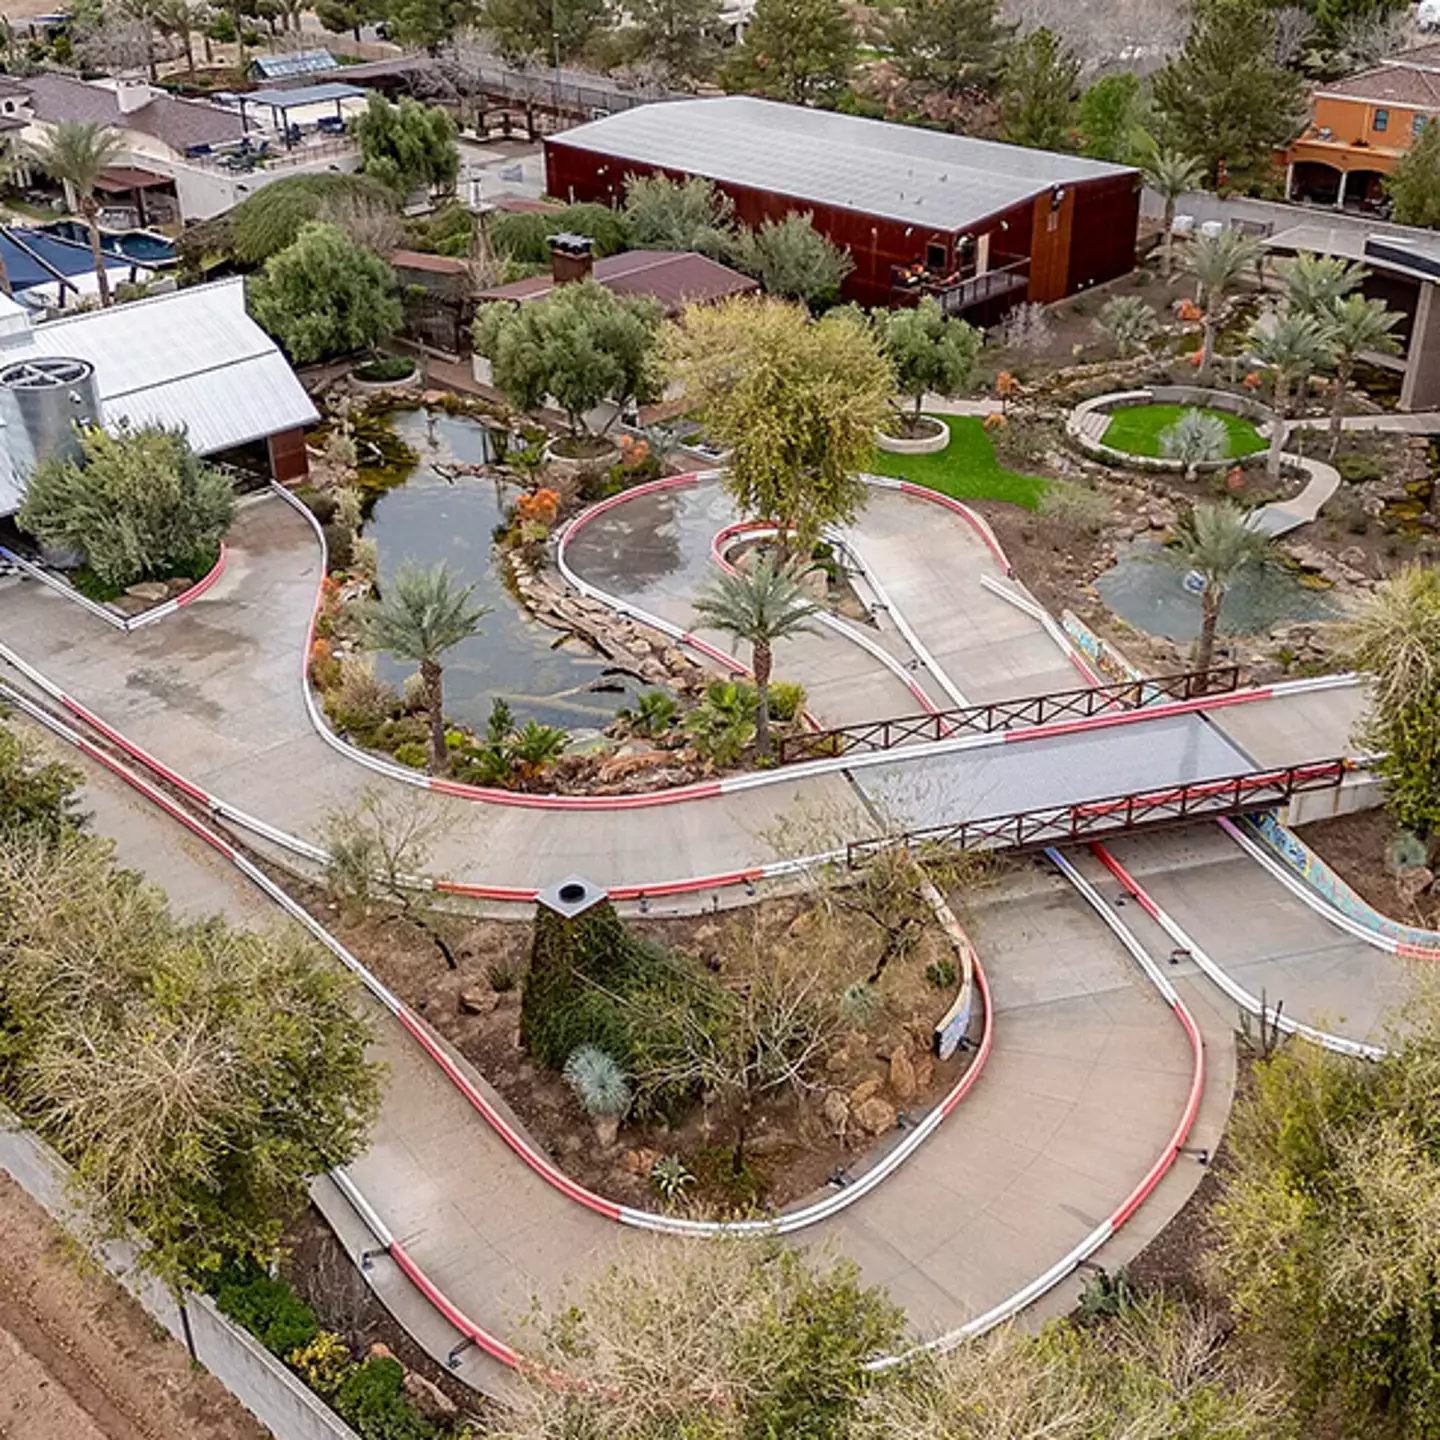 Mansion in Arizona listed for $20,000,000 has its own go-kart track and indoor pit station